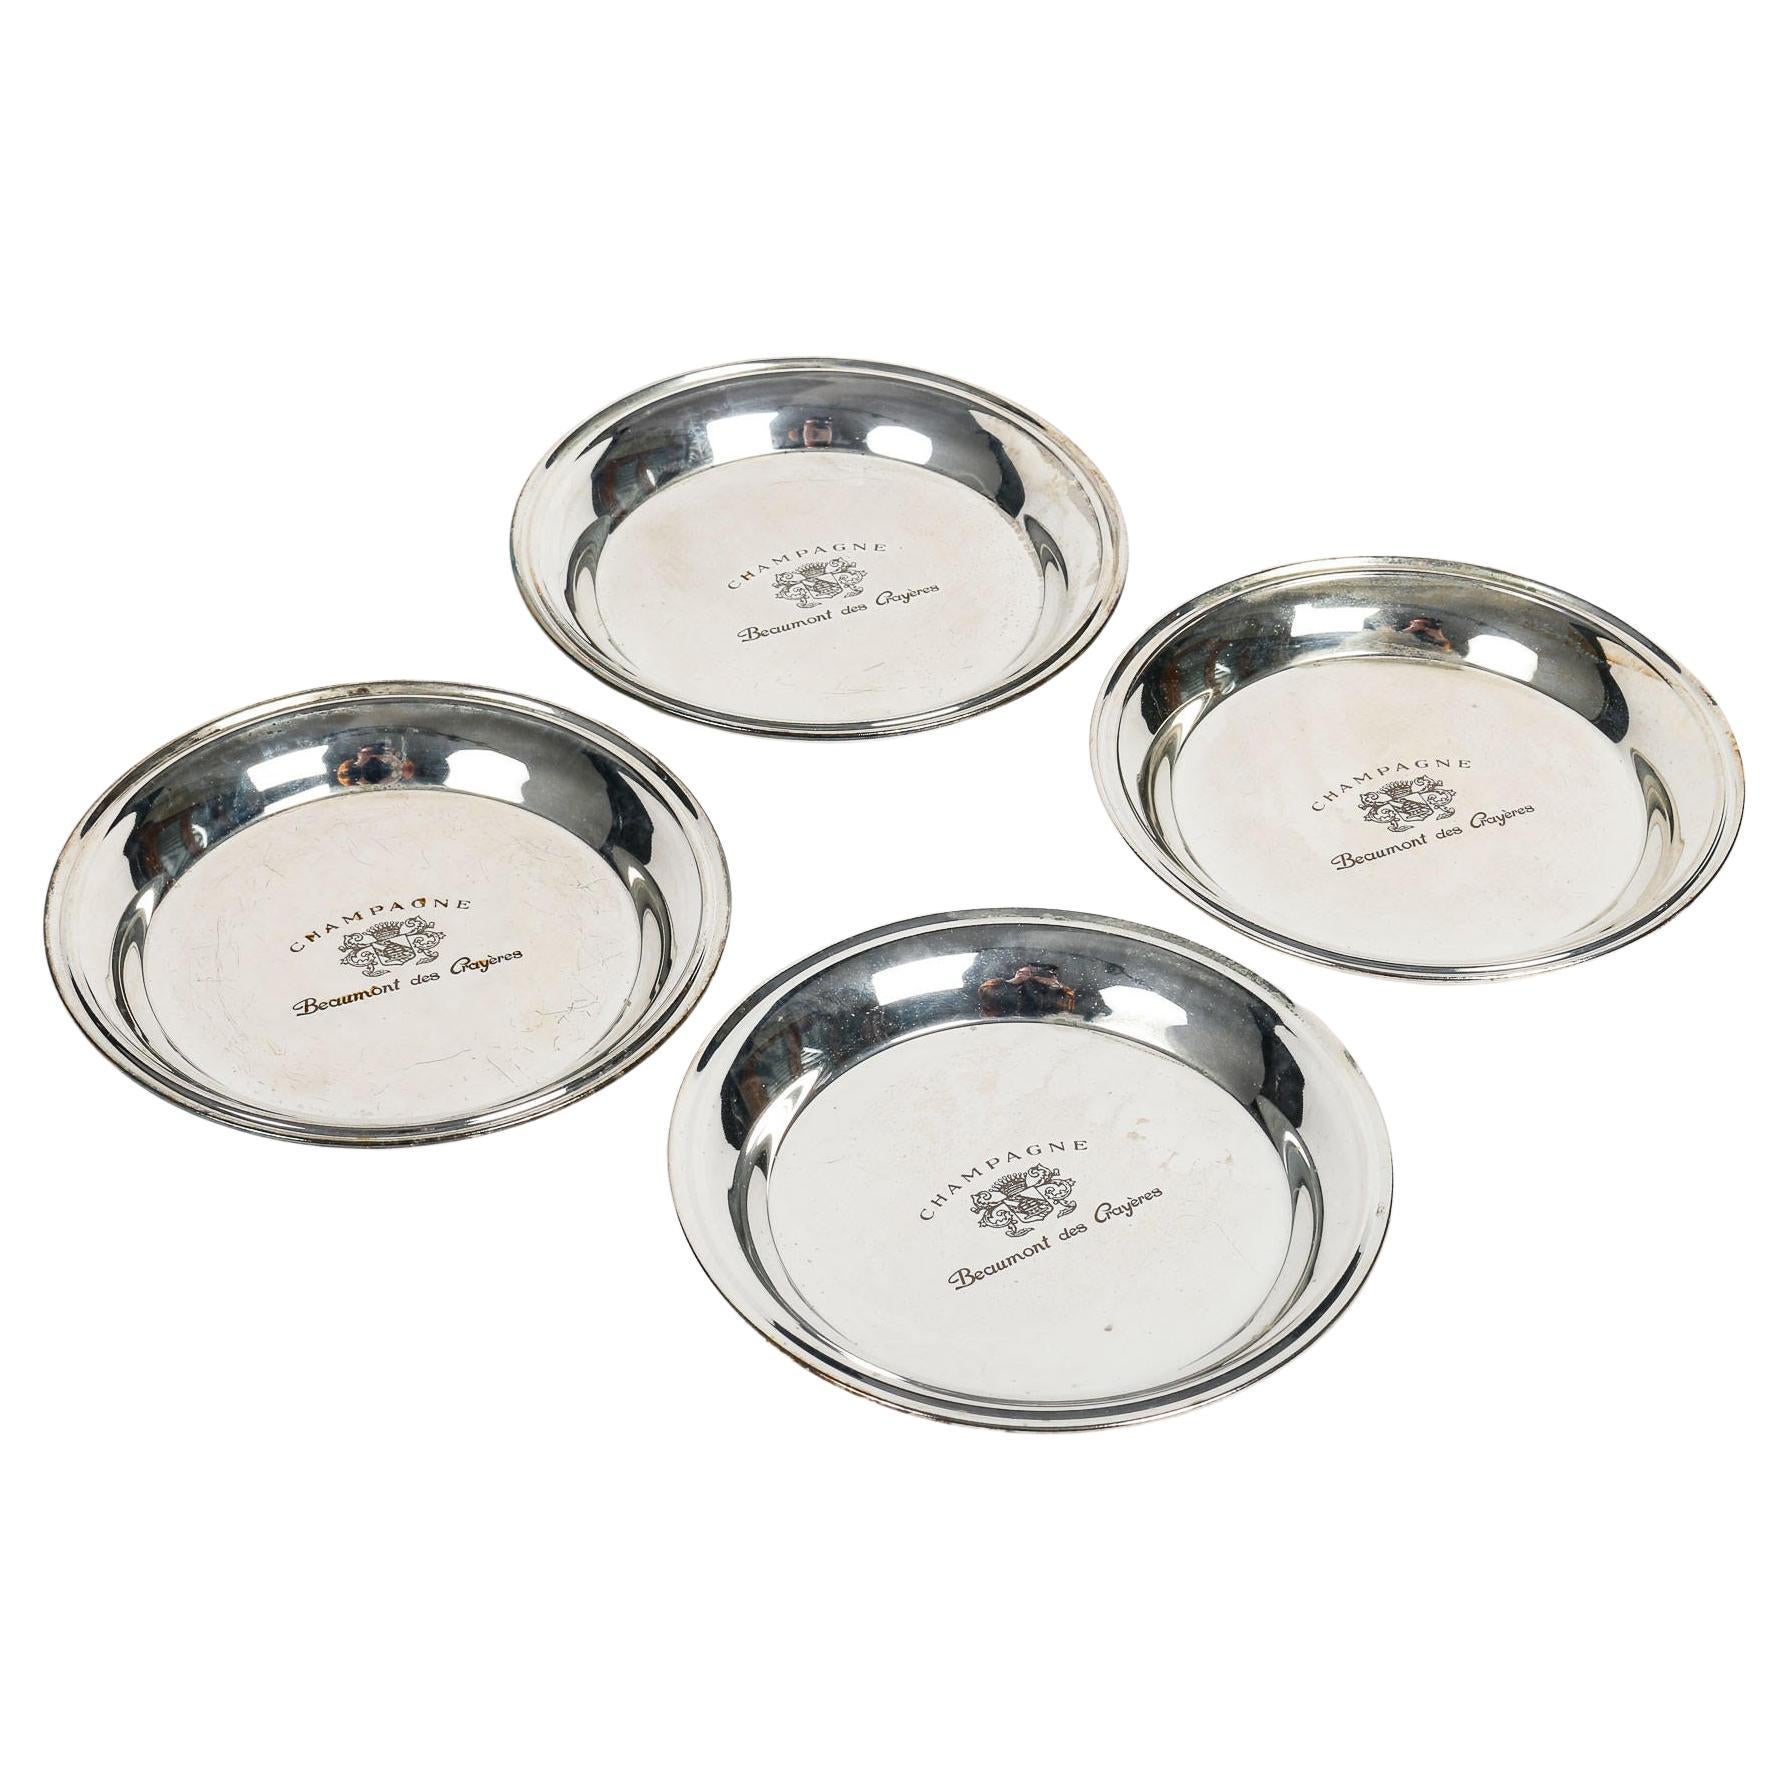 Set of 4 Champagne Coasters in Silver-Plated Metal, 20th Century.